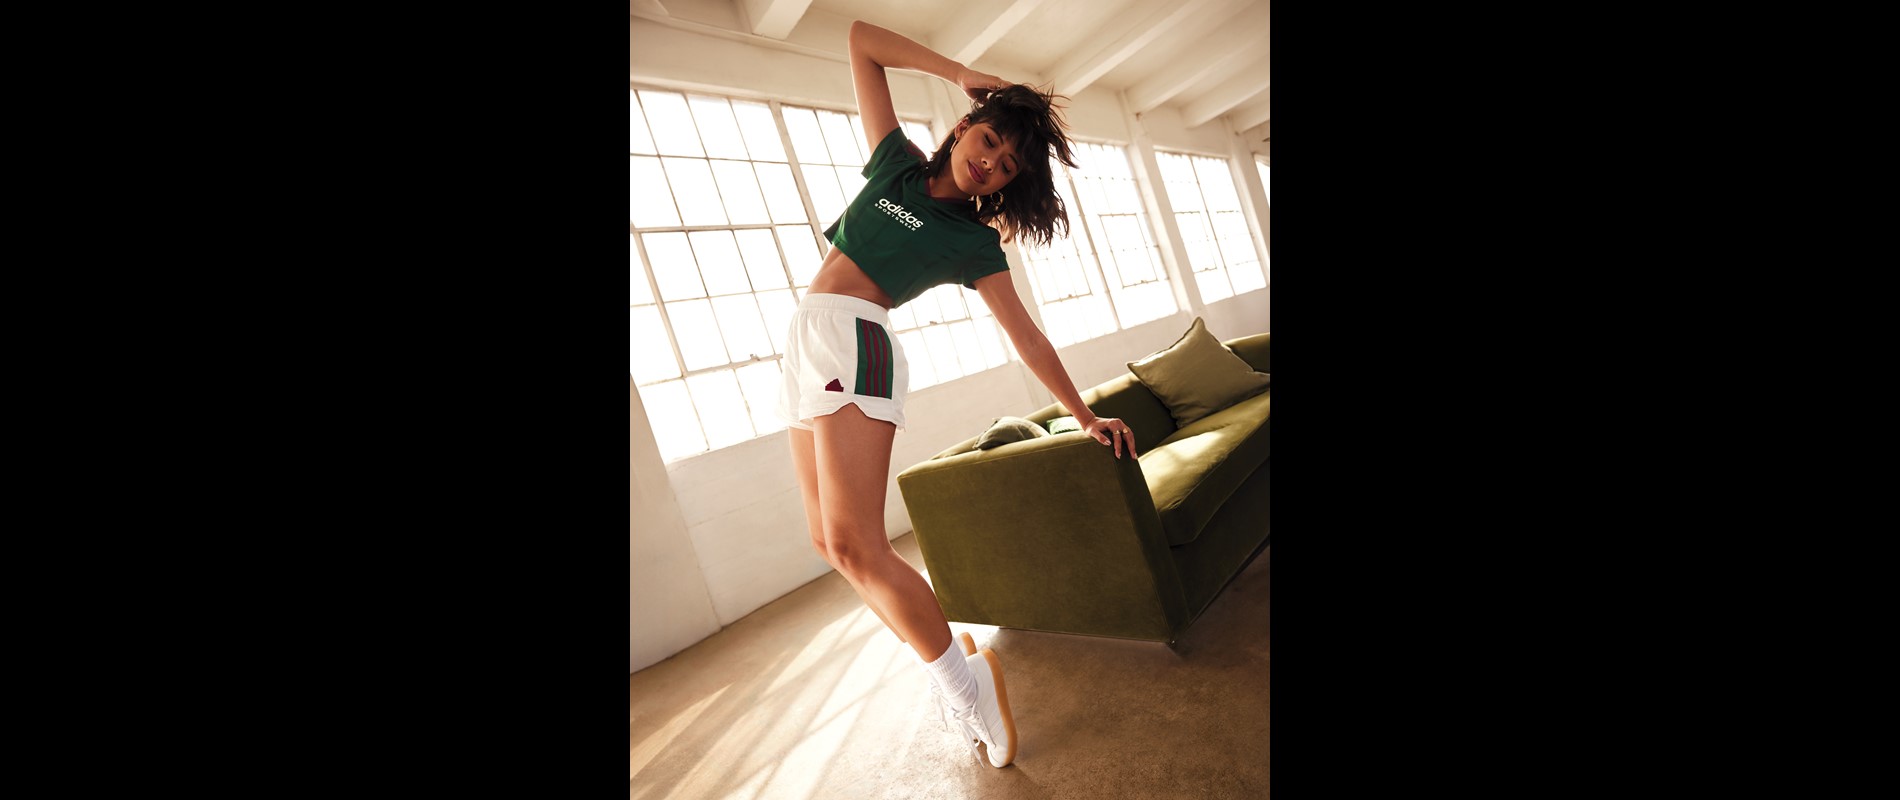 adidas Welcomes Hollywood Actress and Style icon Xochitl Gomez to its Global Family